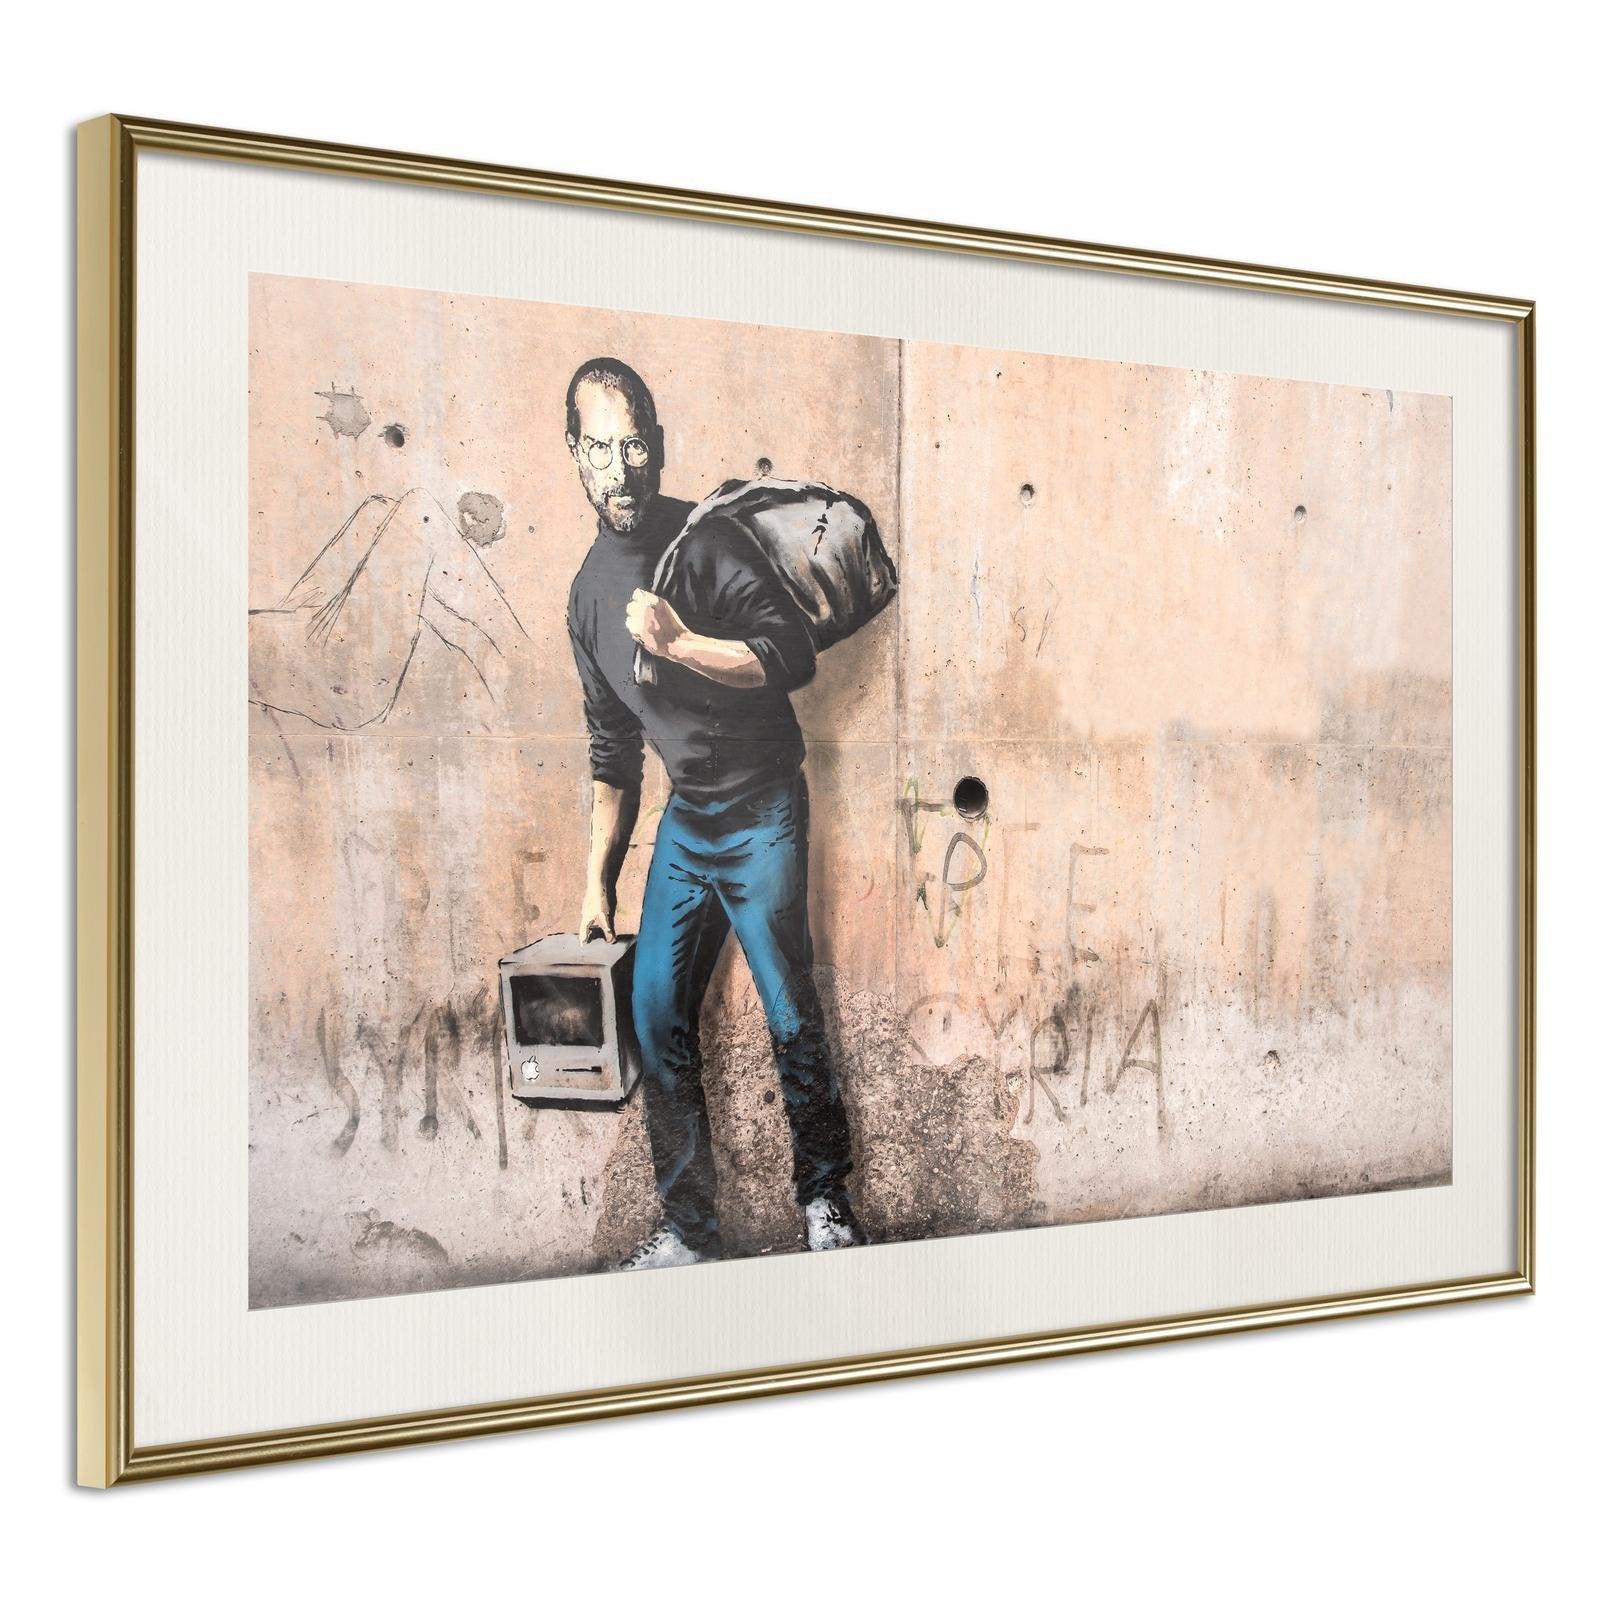 Inramad Poster / Tavla - Banksy: The Son of a Migrant from Syria-Poster Inramad-Artgeist-30x20-Guldram med passepartout-peaceofhome.se